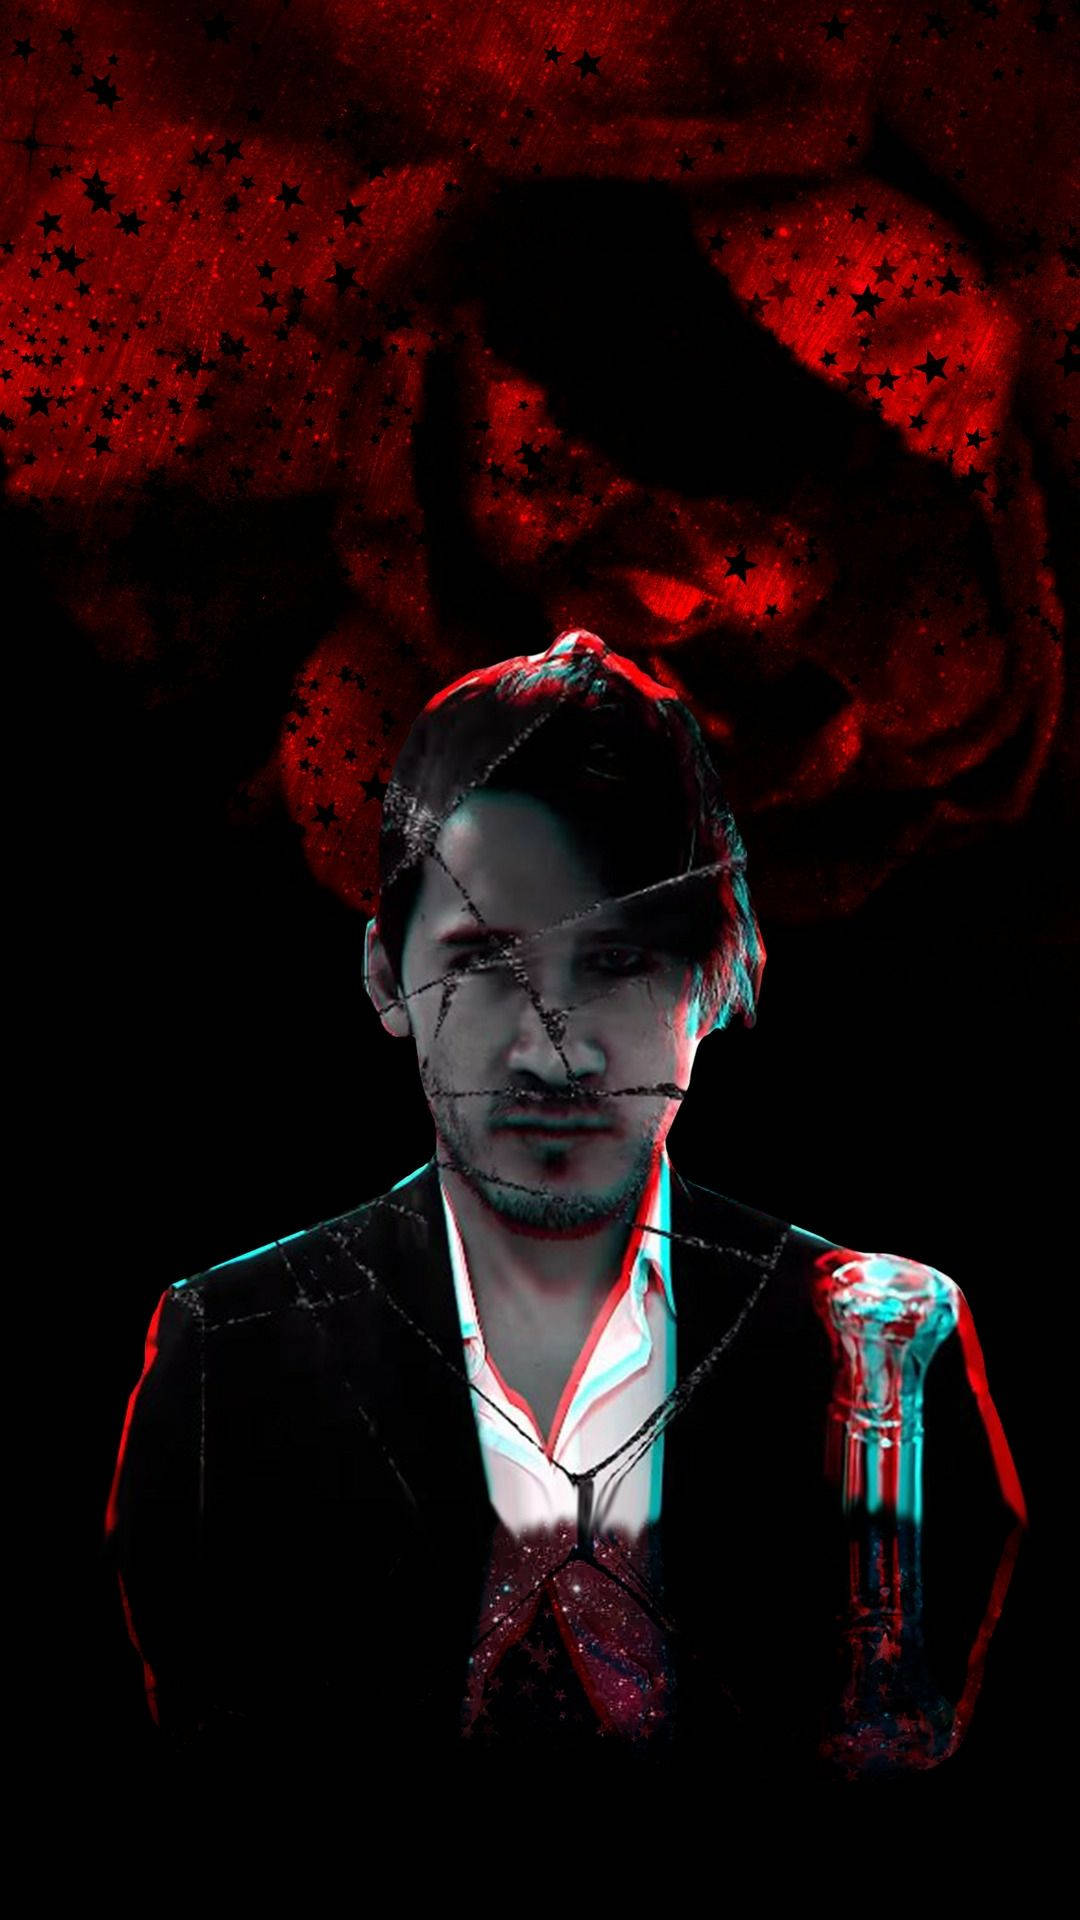 Markiplierbesatt Damien. (assuming This Is A Potential Wallpaper Theme Featuring The Youtubers Markiplier And Damien Haas). Wallpaper